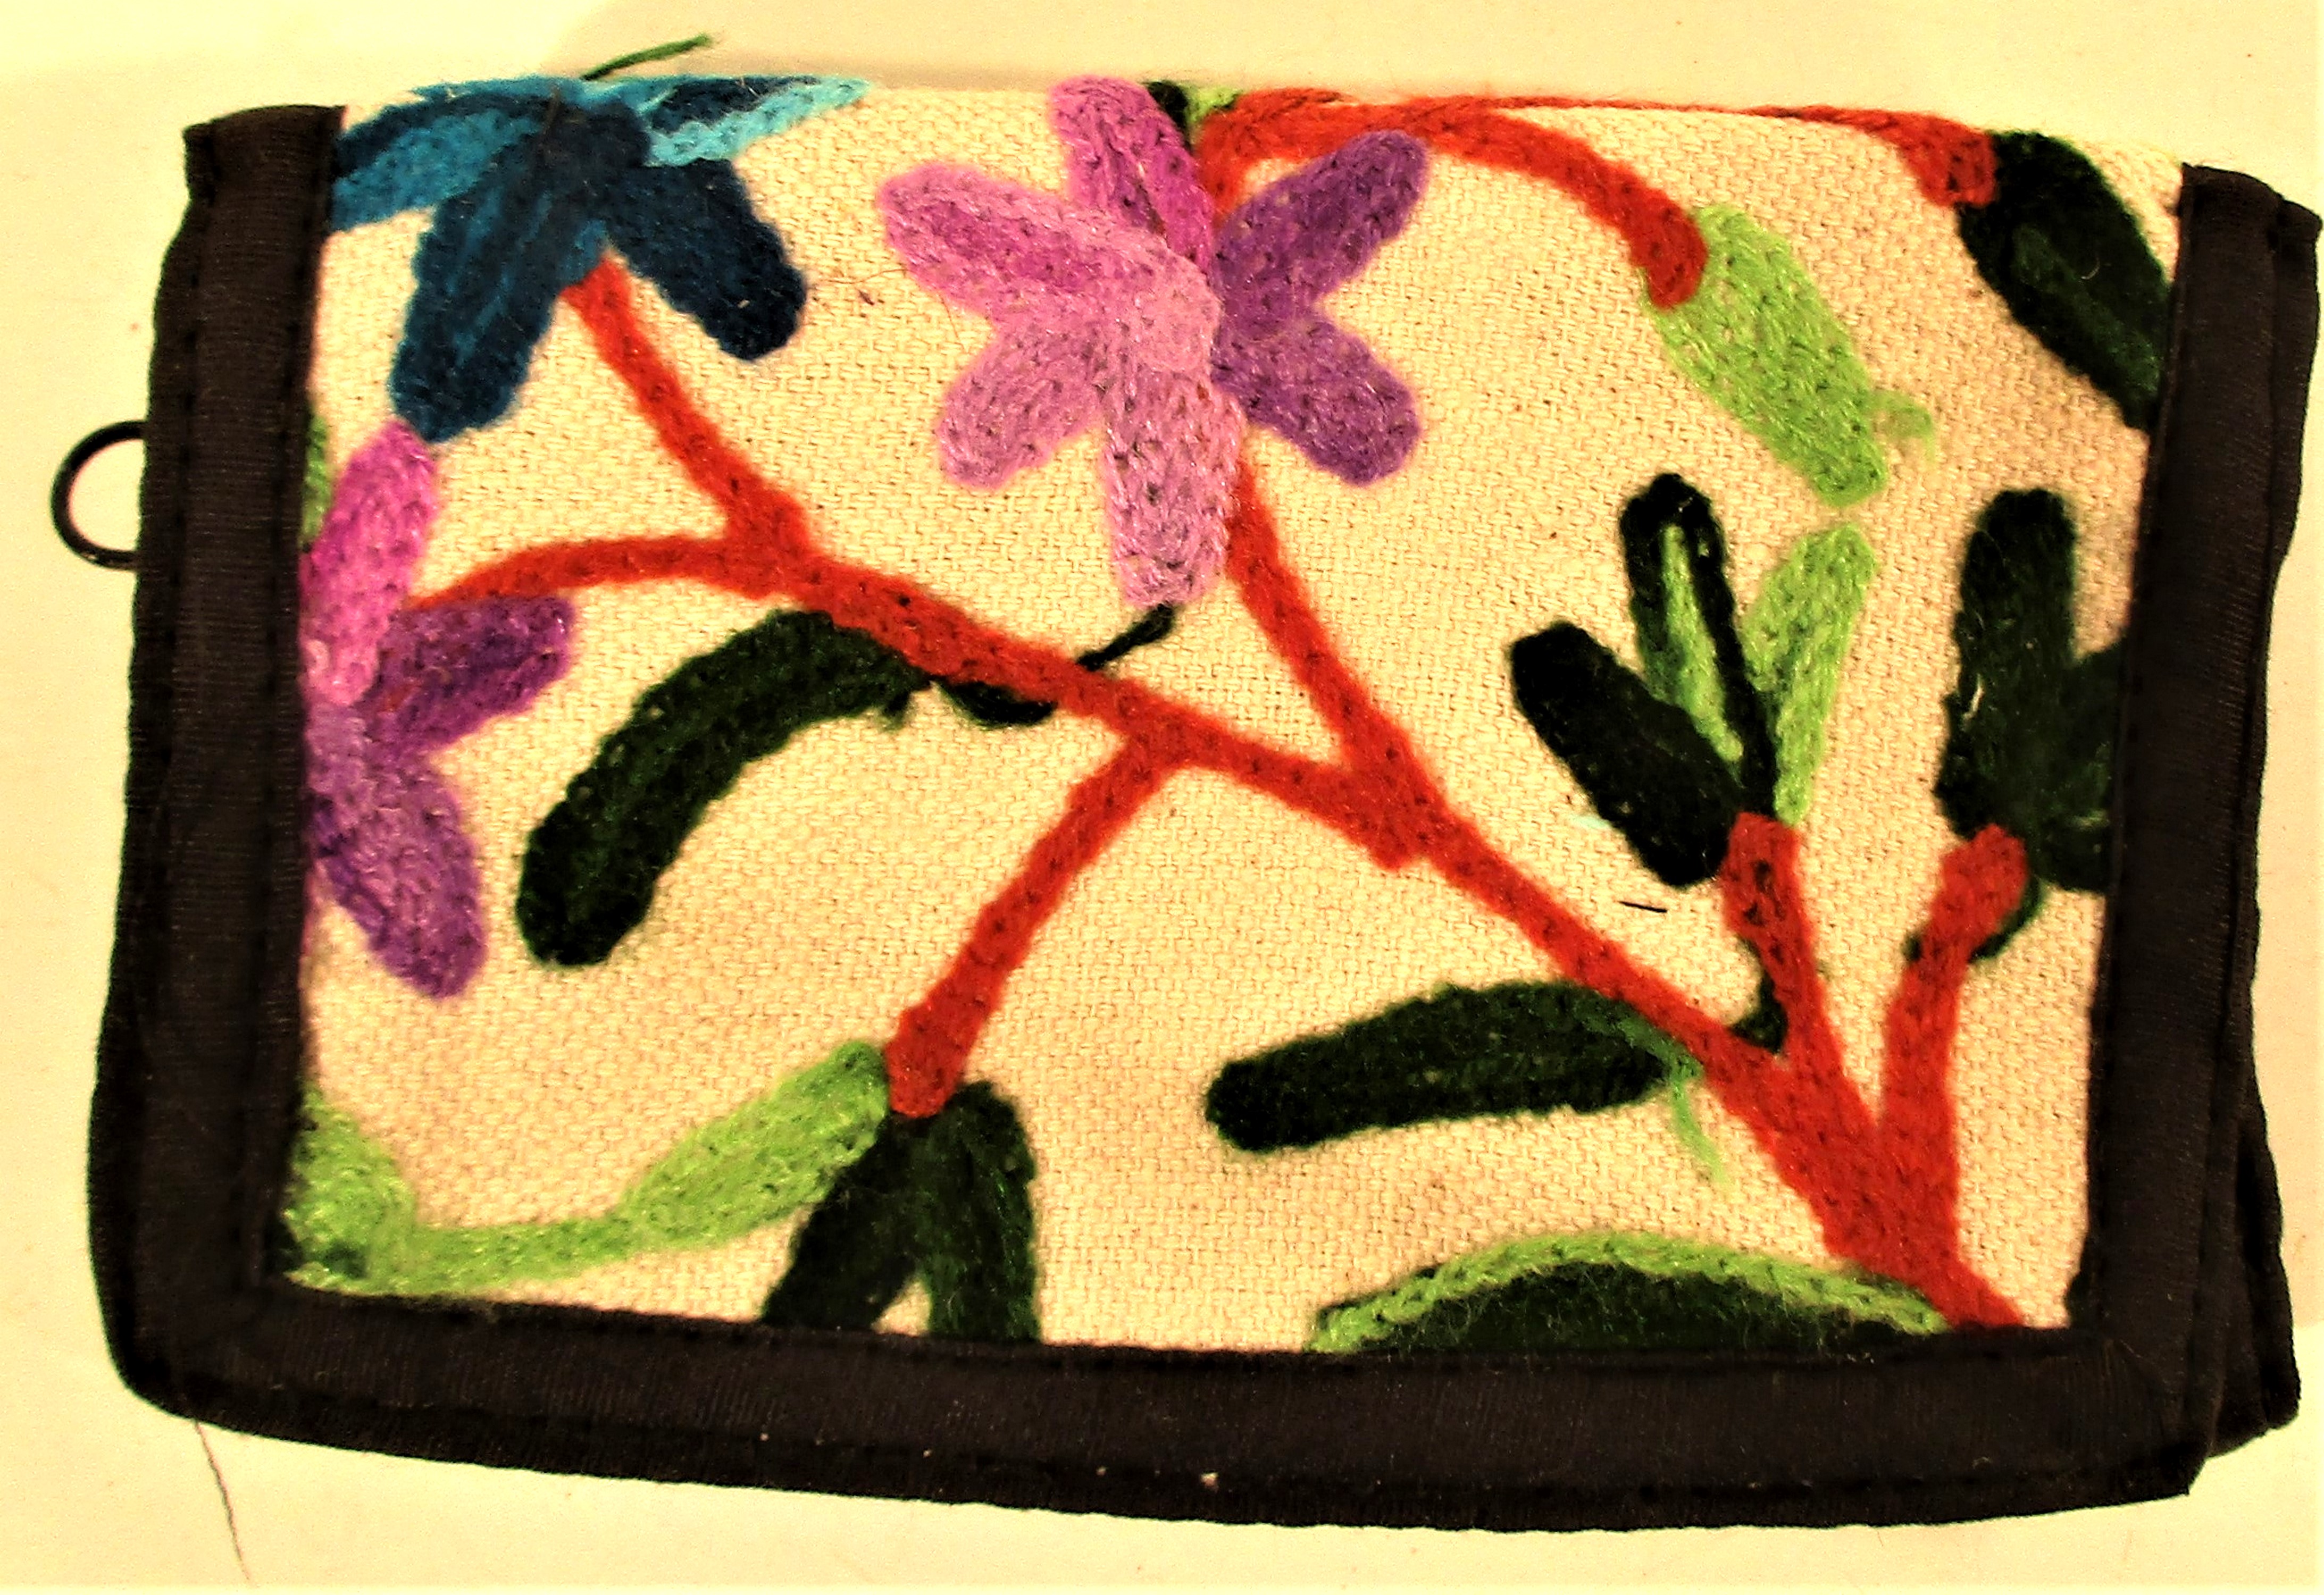 Kashmir embroidered wallet with multiple pockets. 26 x 13cm.